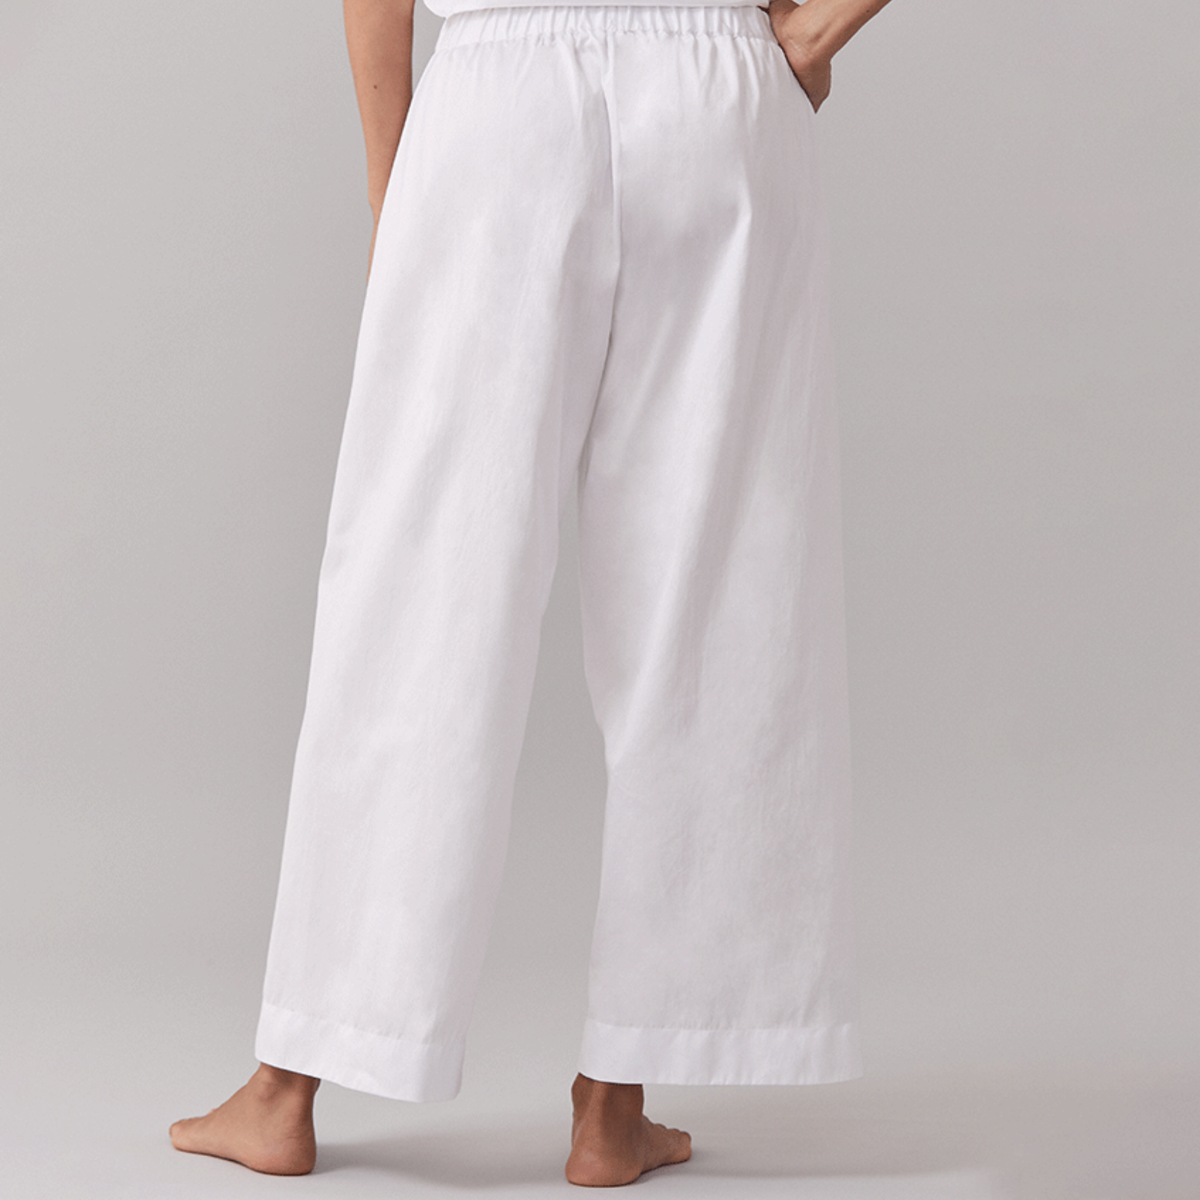 Behind View of White Sferra Caricia Pant Worn by a Woman Model